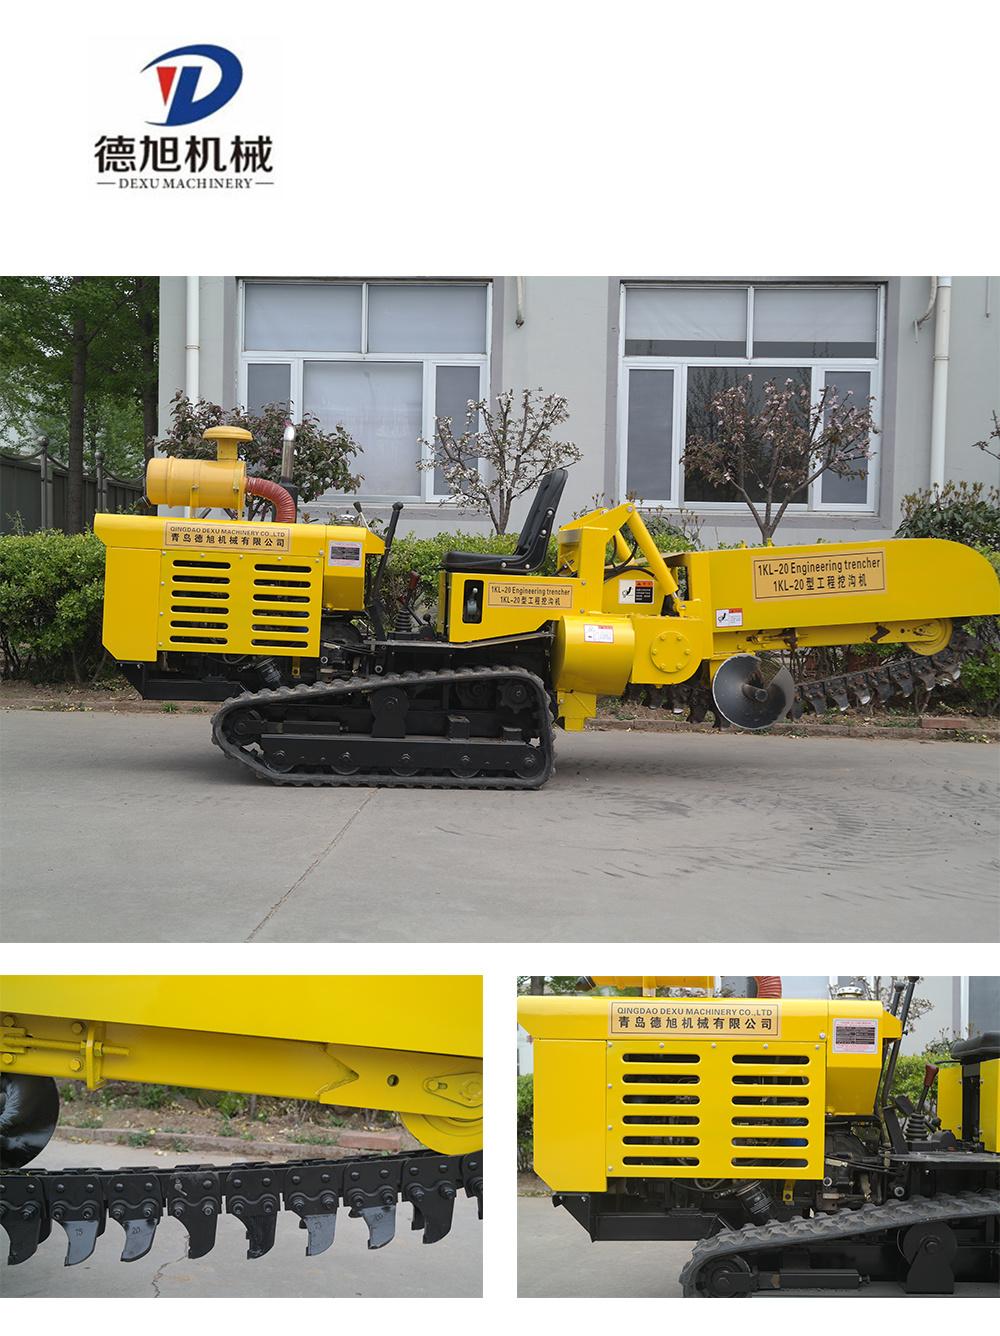 Factory Export Big or Small Gearbox Trencher Machine